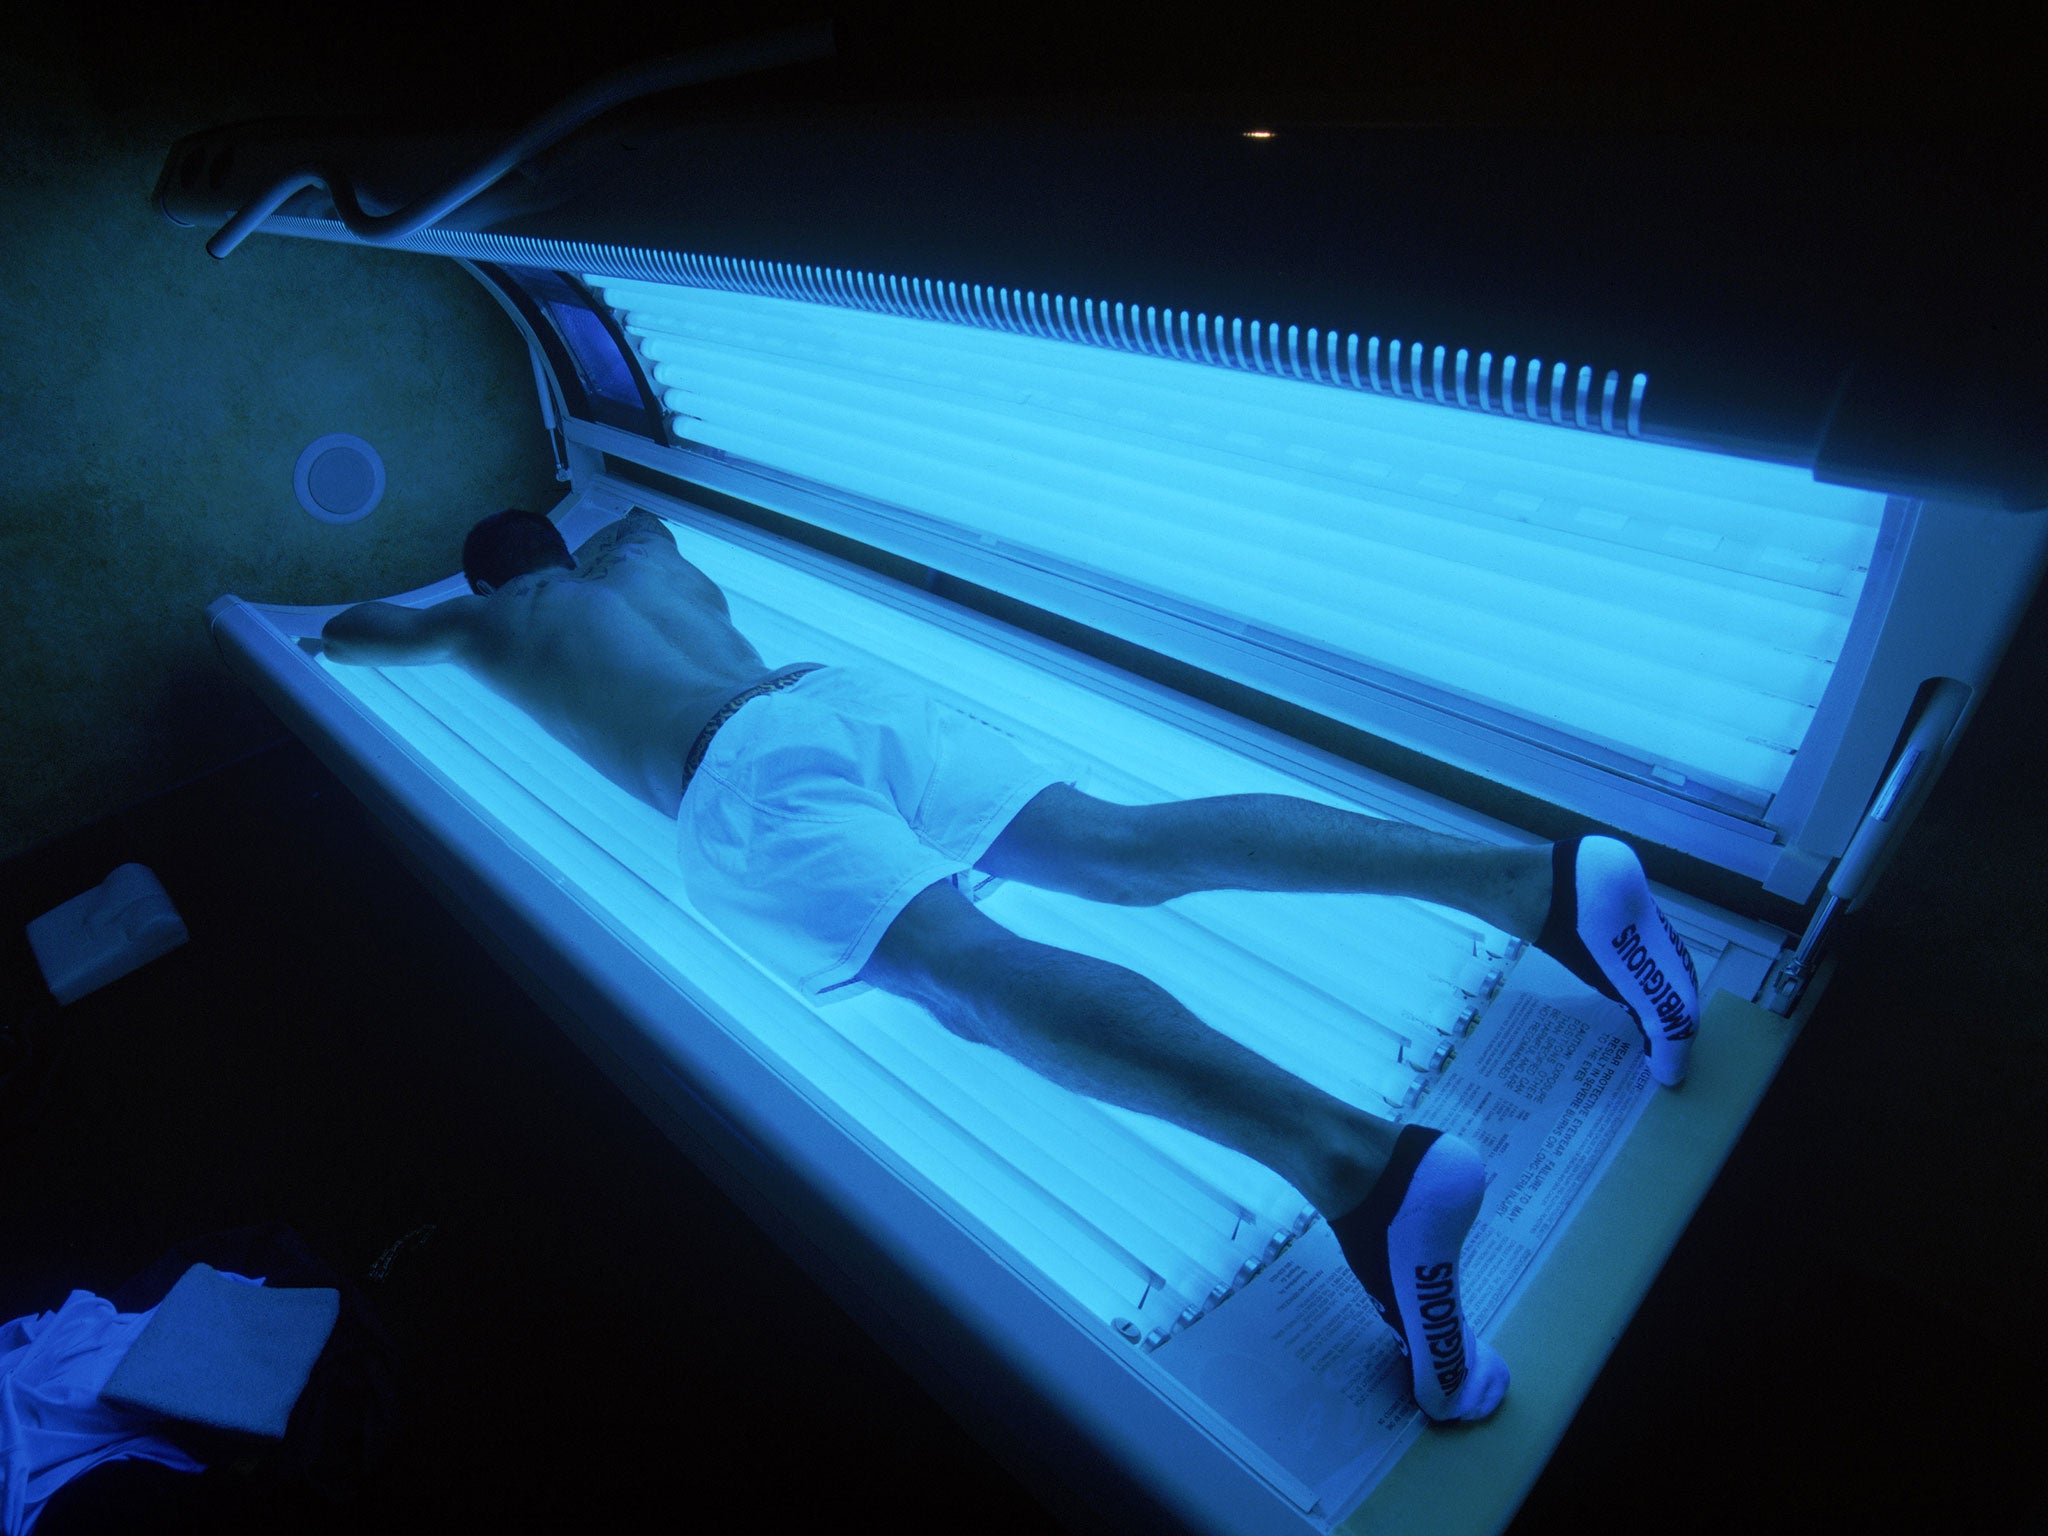 A man tans on a sun bed